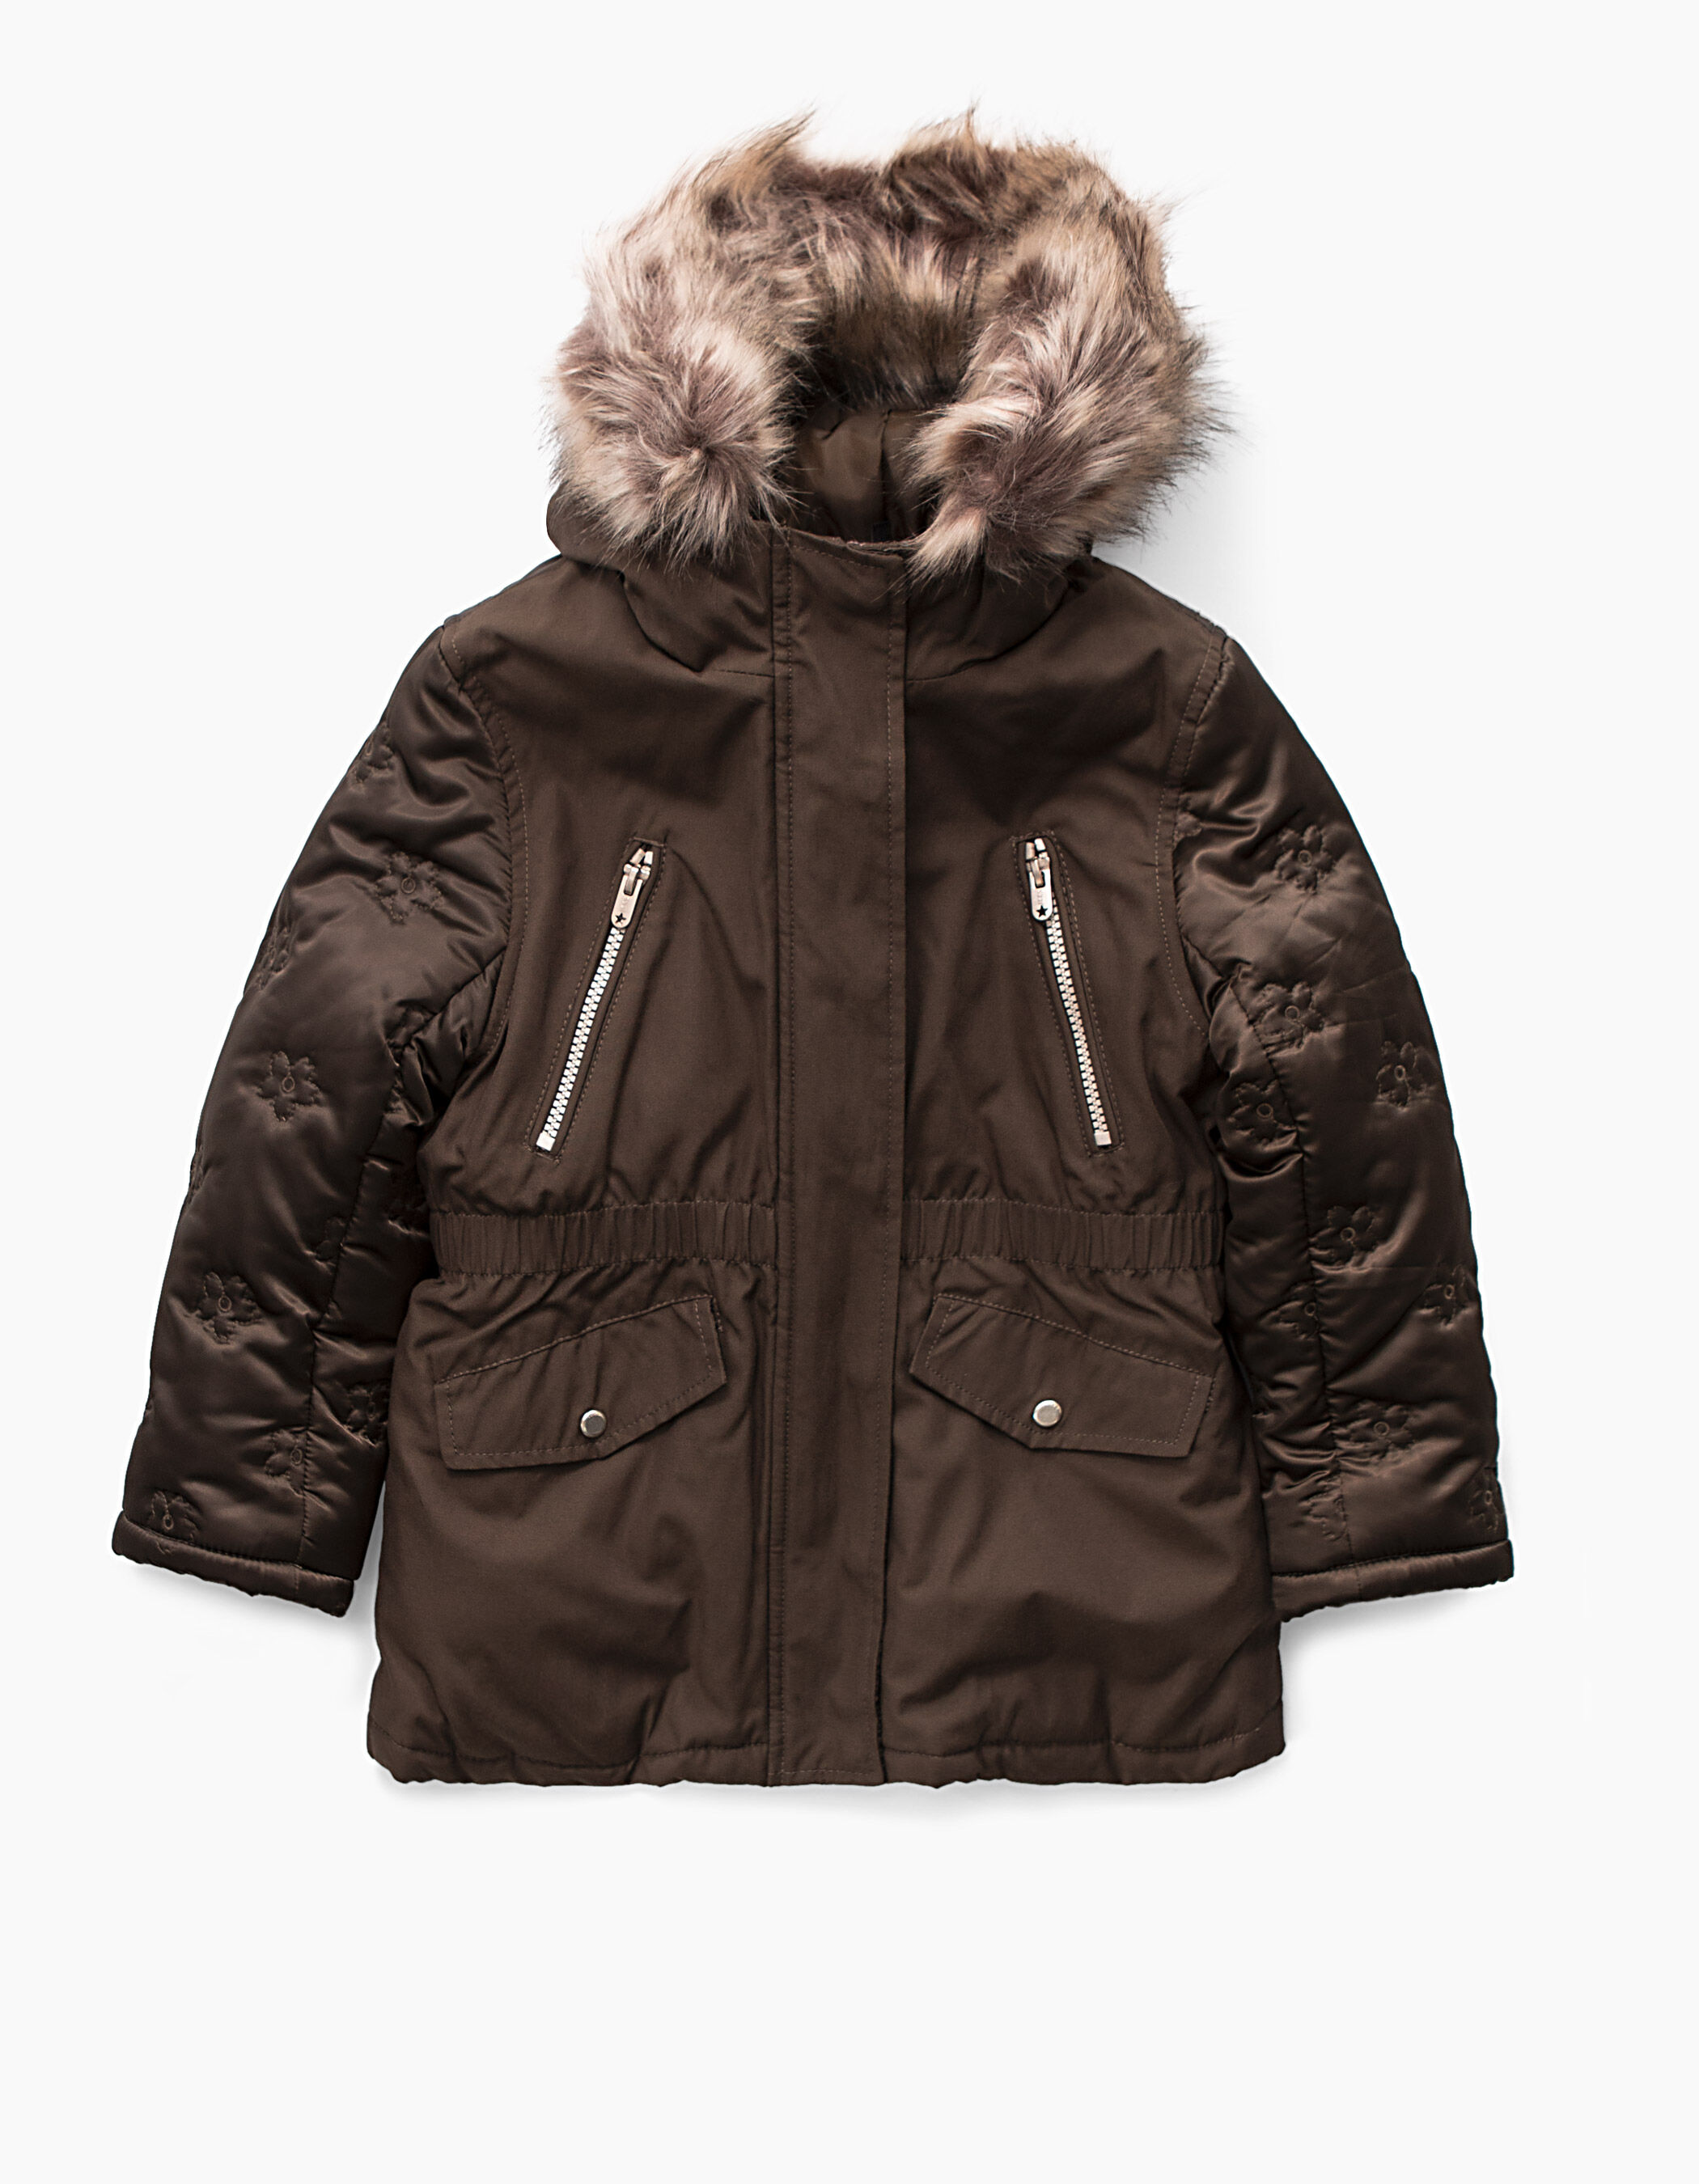 Womens Clothing Jackets Padded and down jackets IKKS Satin Khaki 3-in-1 Parka+reversible Padded Jacket in Brown 